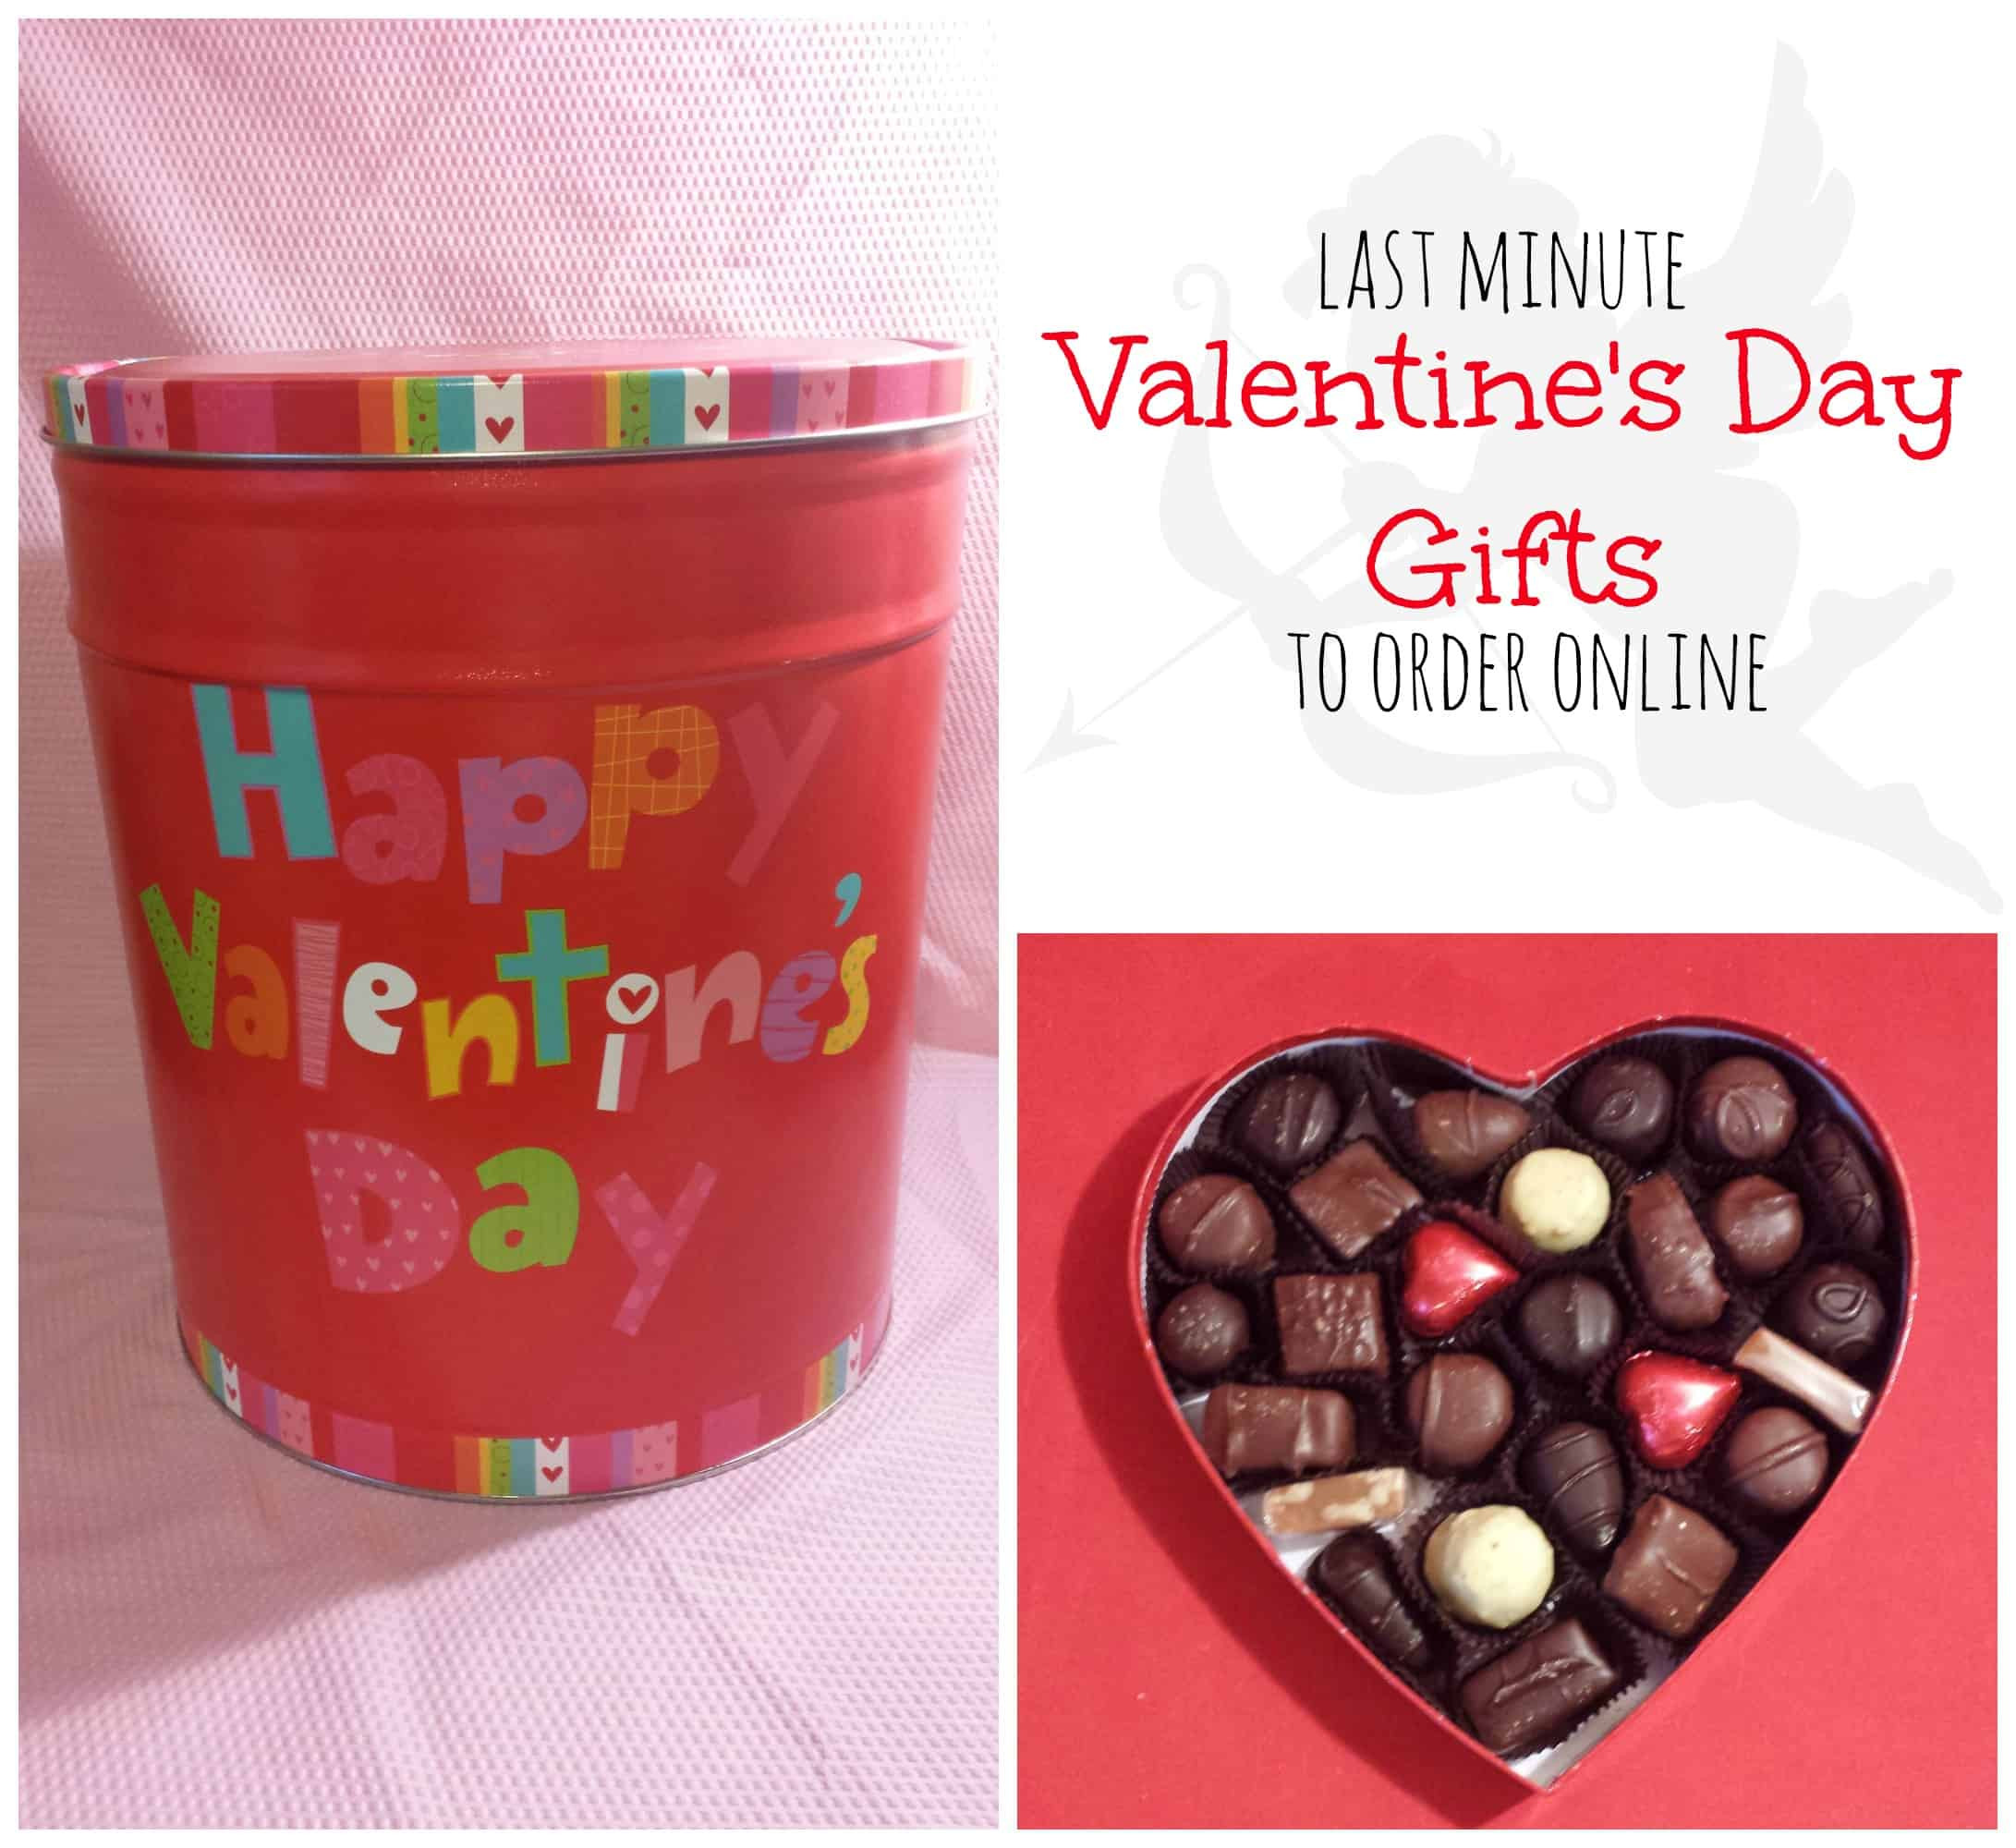 Valentines Day Online Gifts
 Last Minute Valentine s Day Gifts to Order line